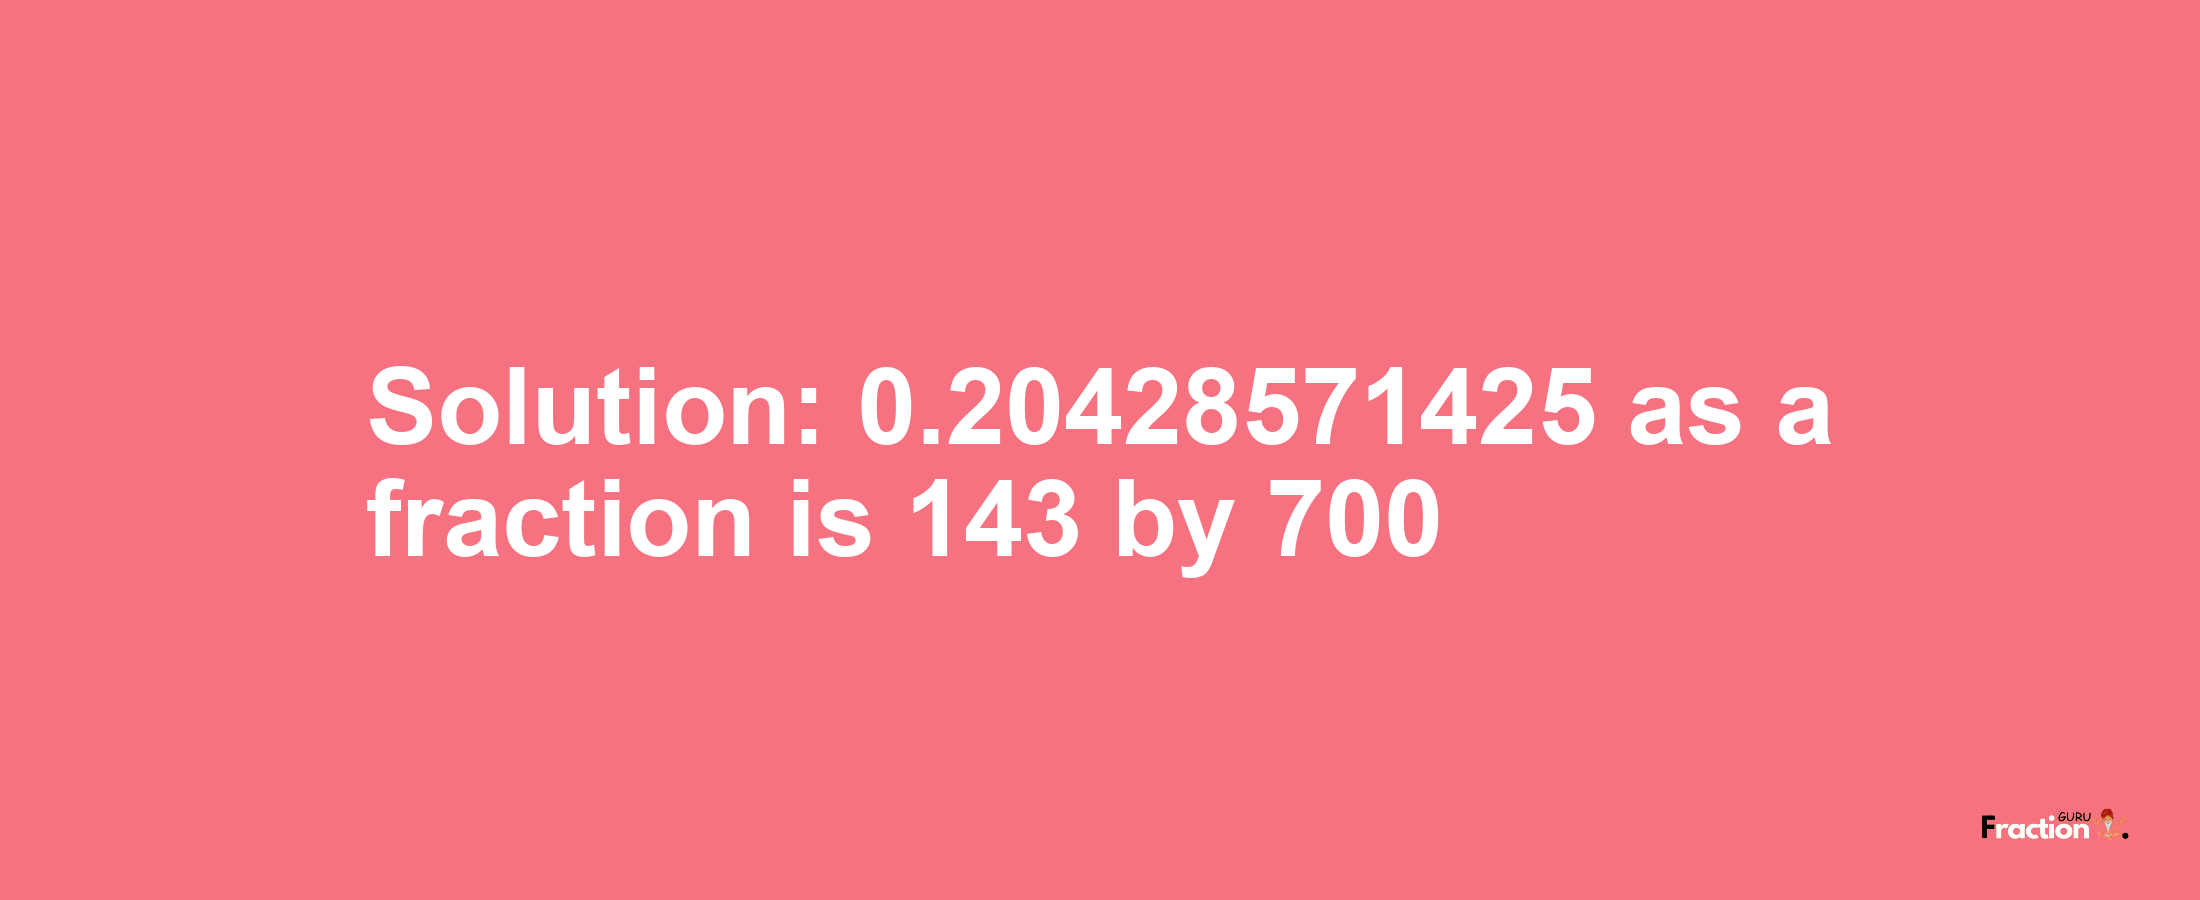 Solution:0.20428571425 as a fraction is 143/700